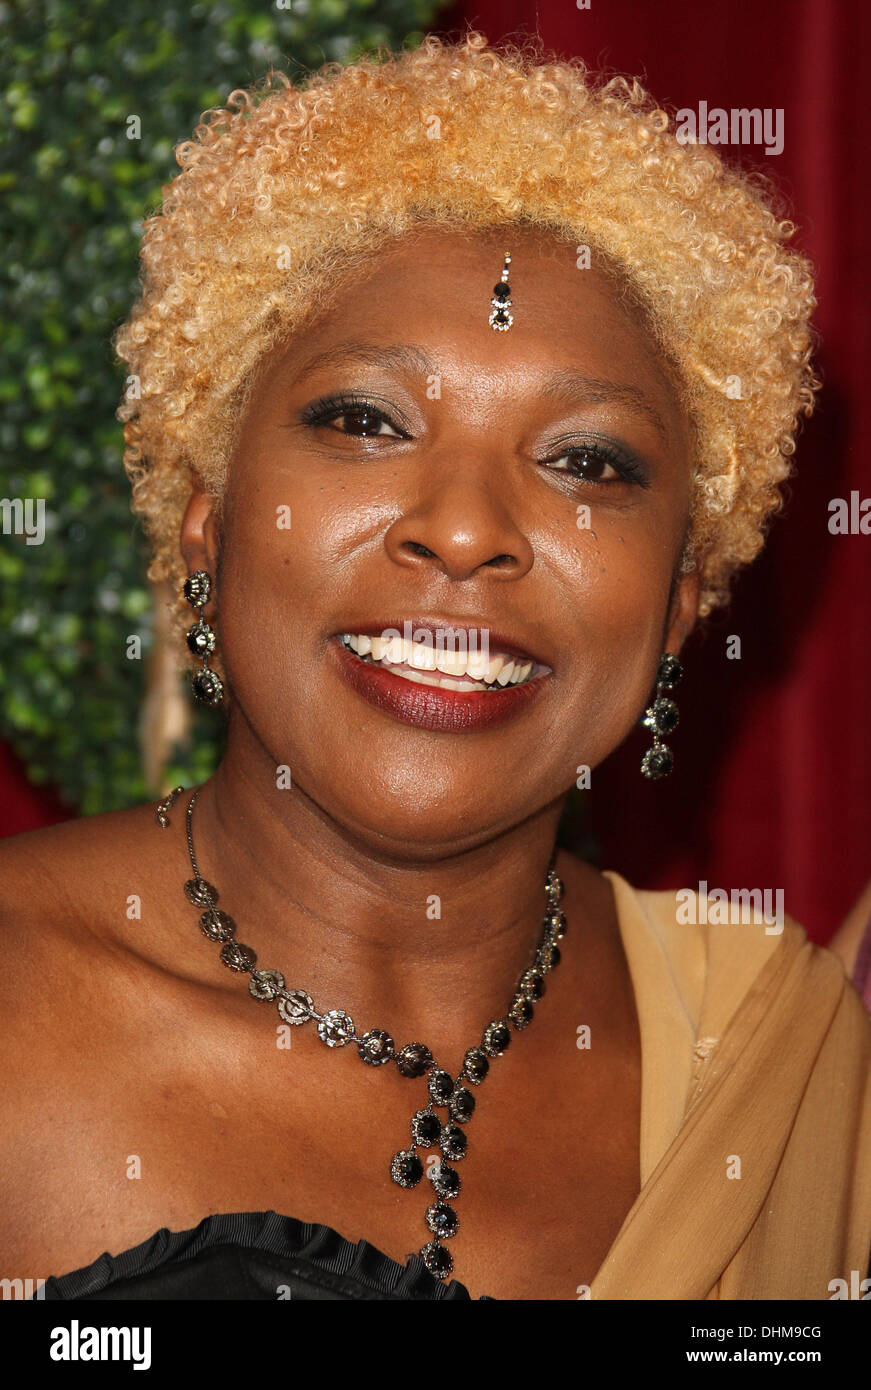 Lorna Laidlaw The British Soap Awards 2012 held at the London TV Centre - Arrivals London, England - 28.04.12 Stock Photo